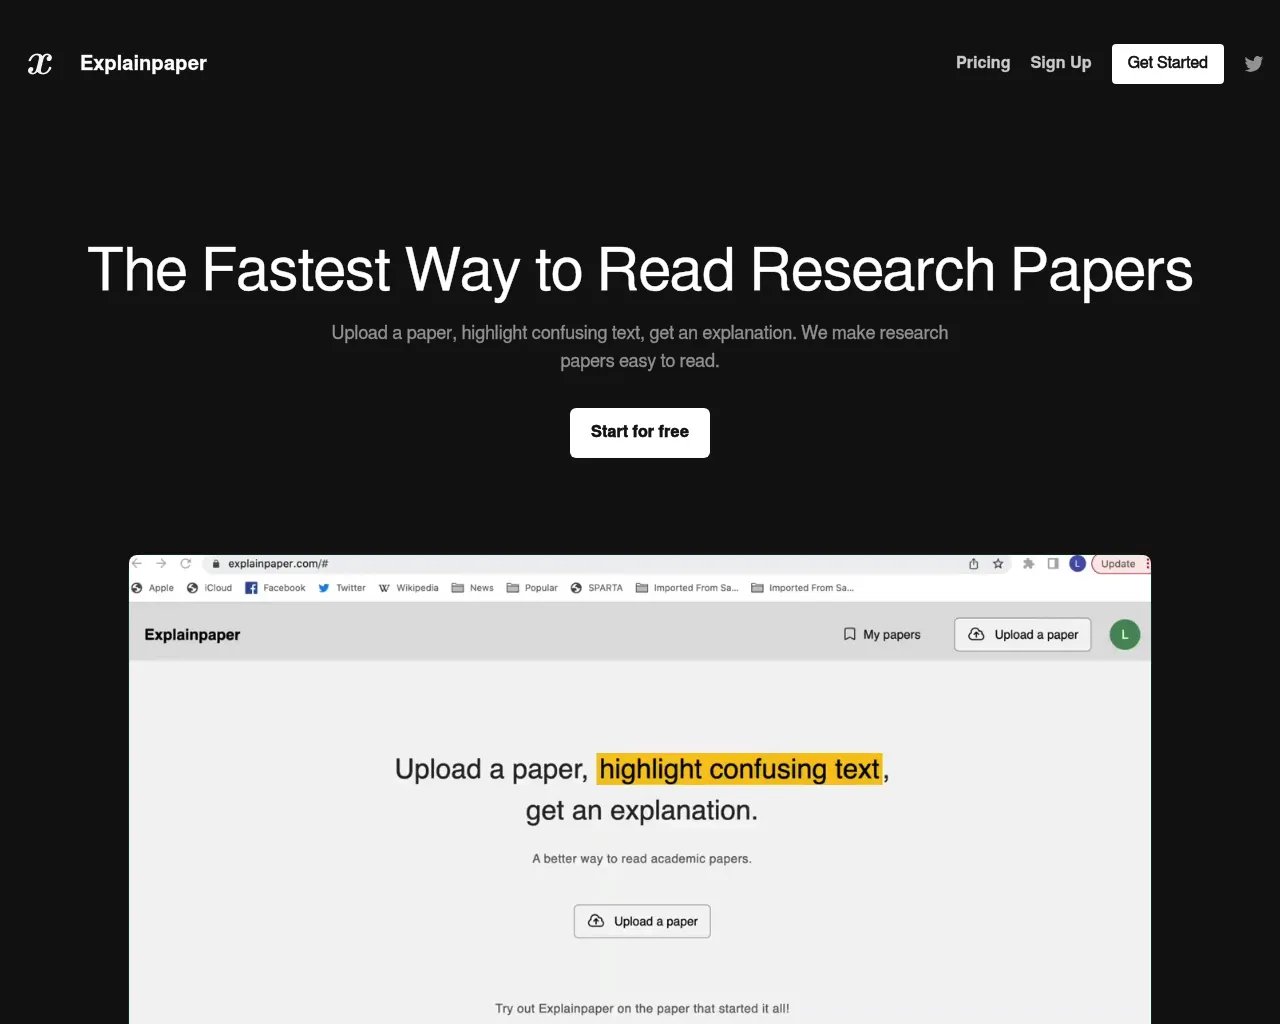 The Fastest Way to Read Research Papers